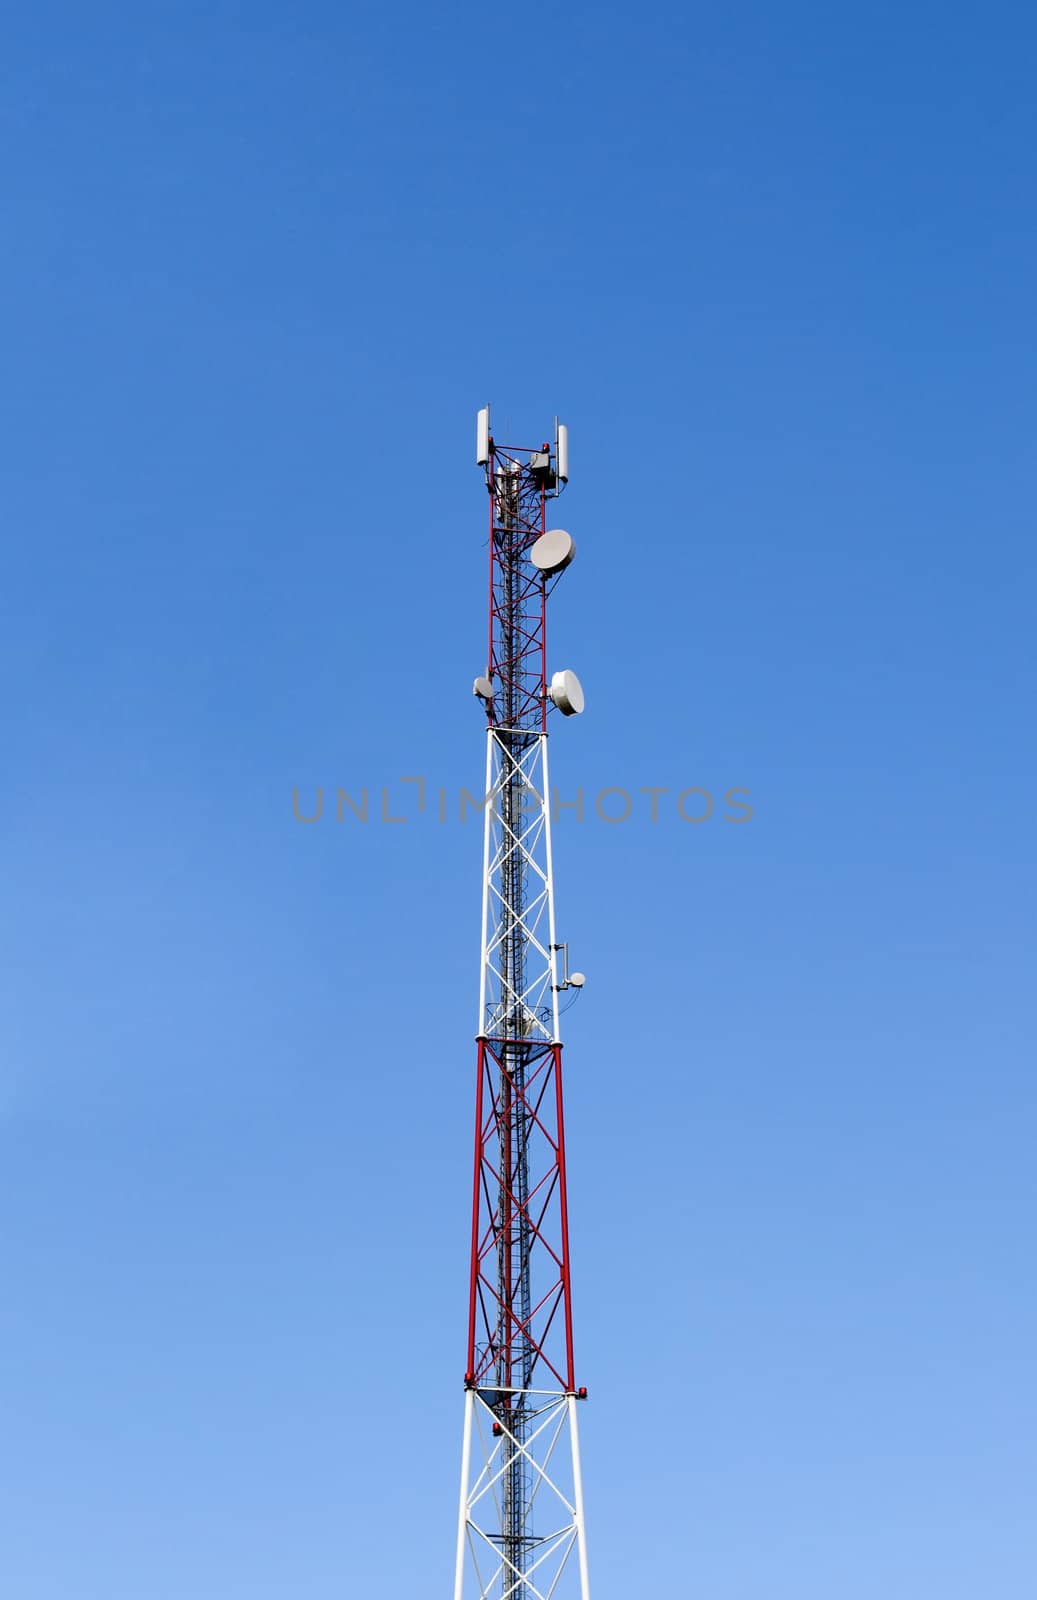 Top of a cellular tower on blue sky background